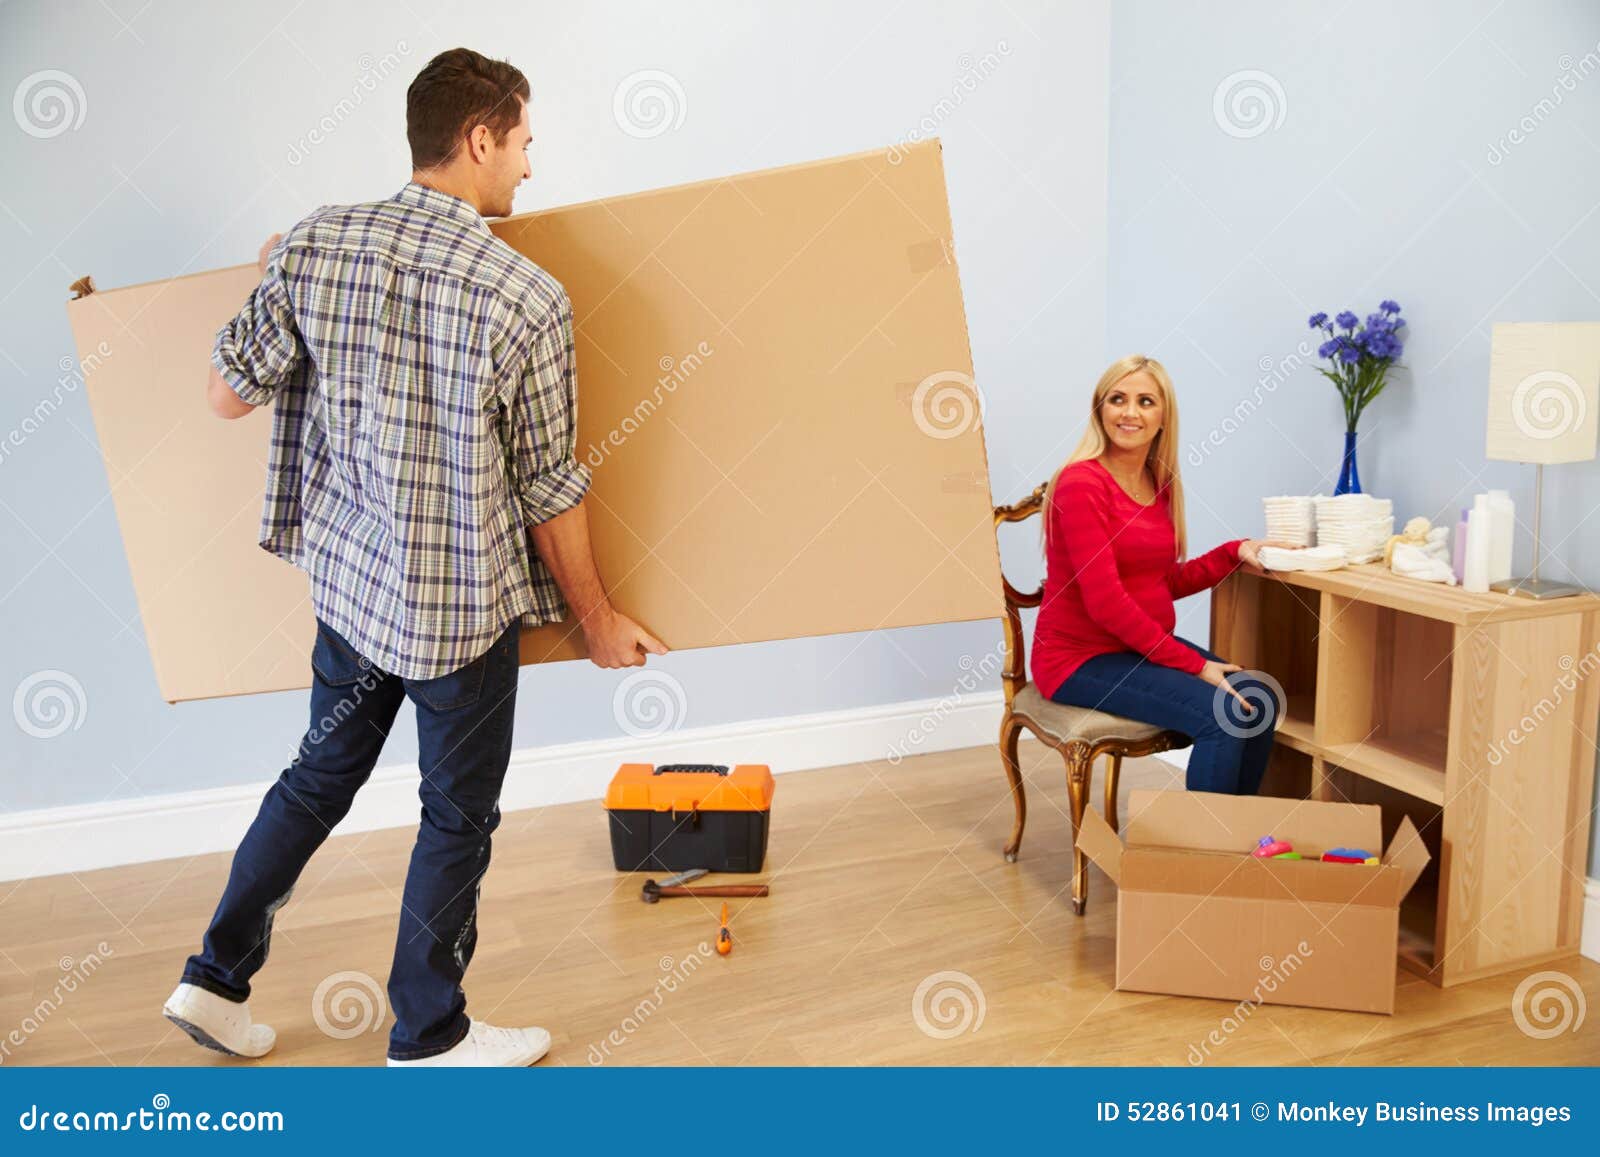 couple preparing to assemble flat pack furniture in nursery